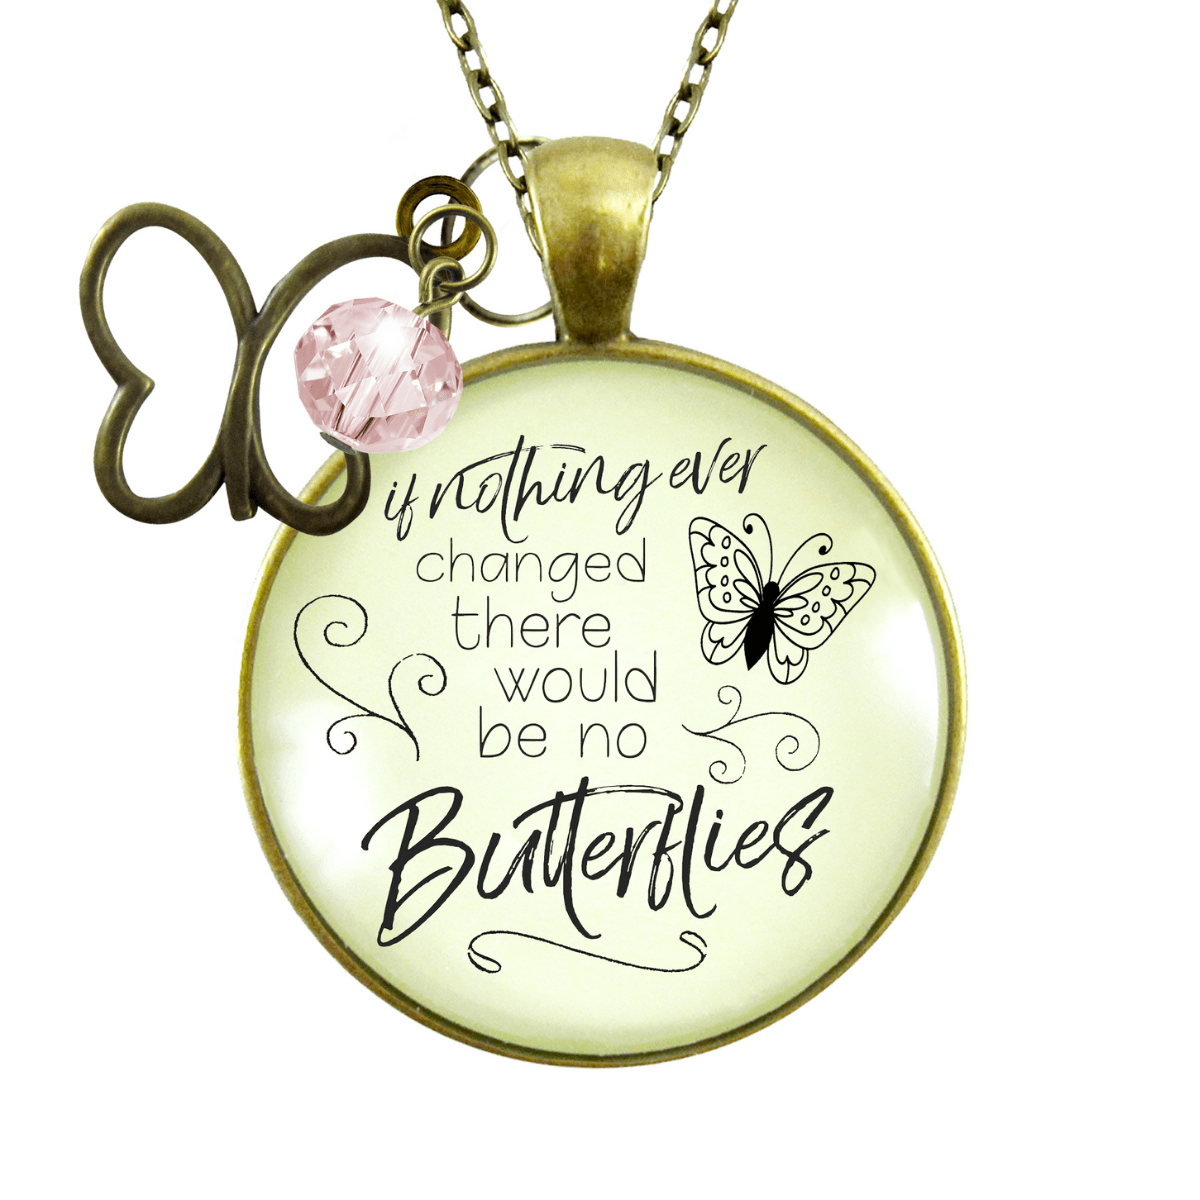 Gutsy Goodness Butterfly NecklaceIf Nothing Changed Inspirational Word Butterfly Charm Pink Bead - Gutsy Goodness Handmade Jewelry;Butterfly Necklaceif Nothing Changed Inspirational Word Butterfly Charm Pink Bead - Gutsy Goodness Handmade Jewelry Gifts